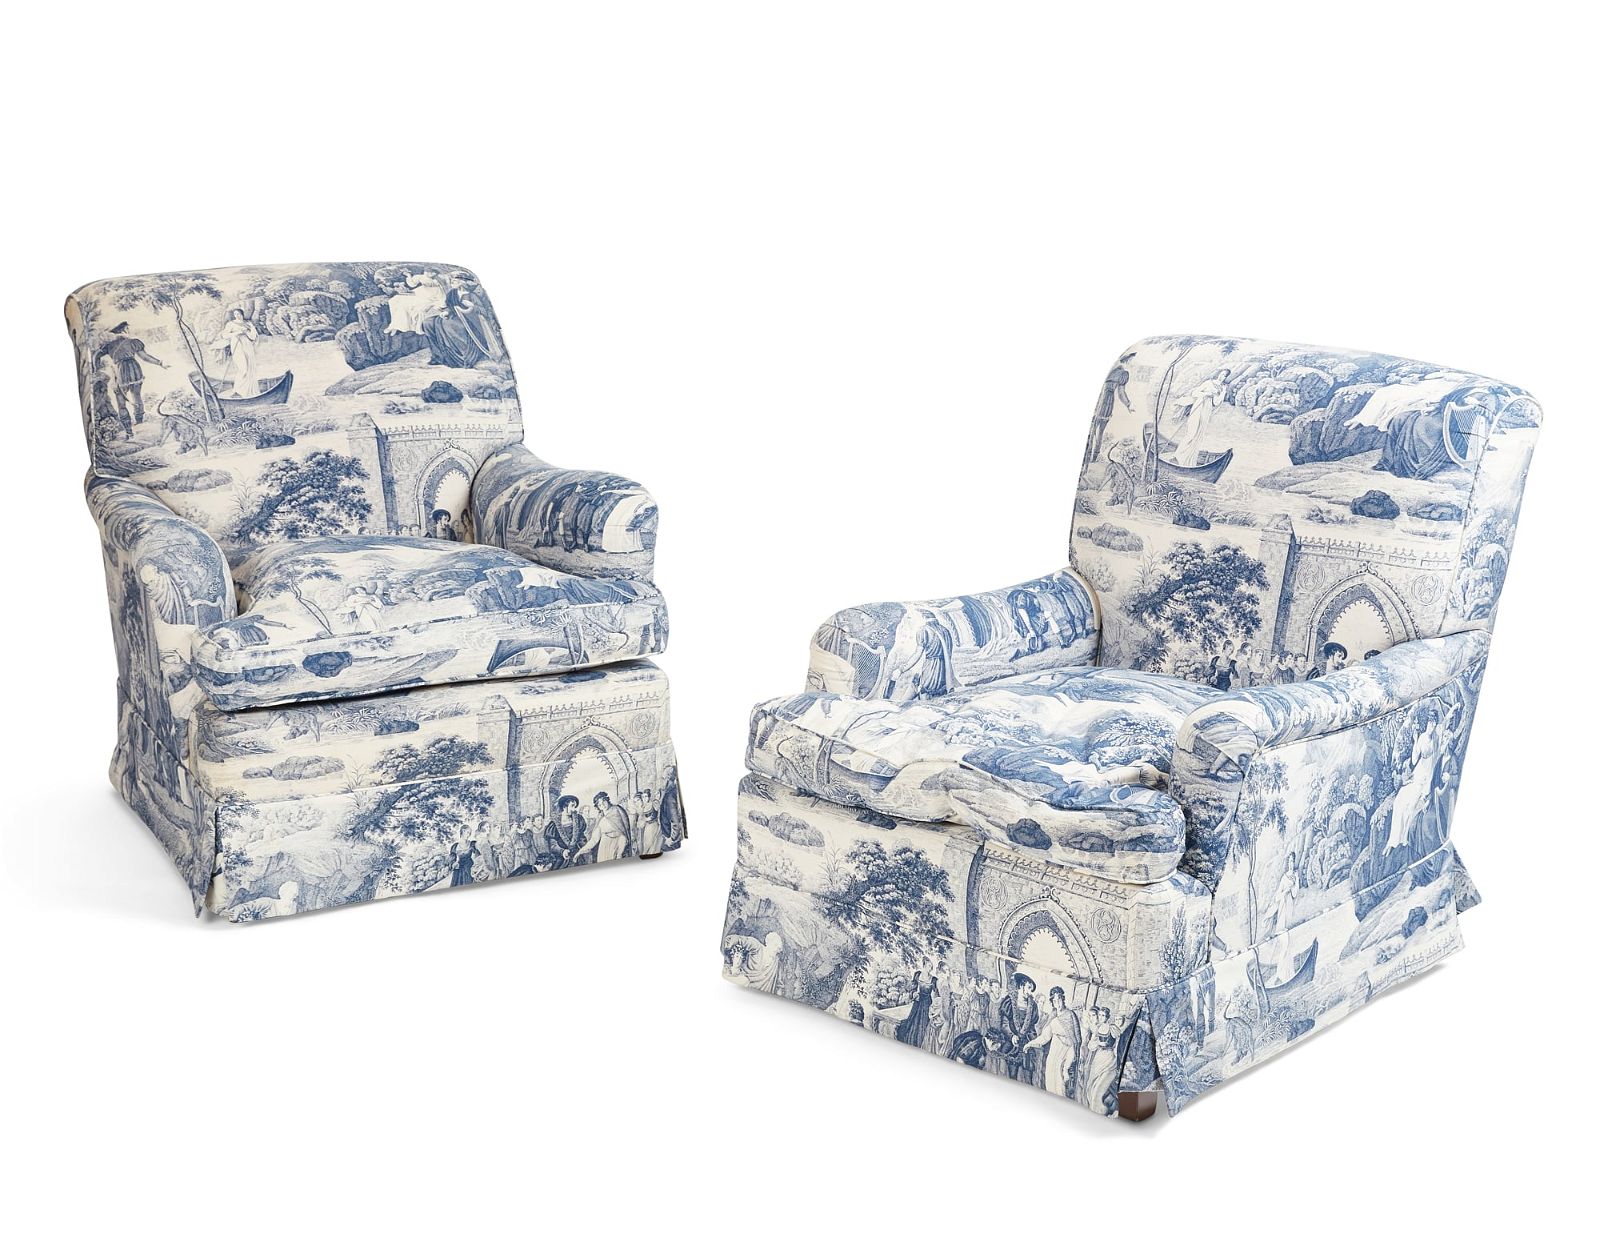 A PAIR OF BLUE AND WHITE UPHOLSTERED 2fb3fcc